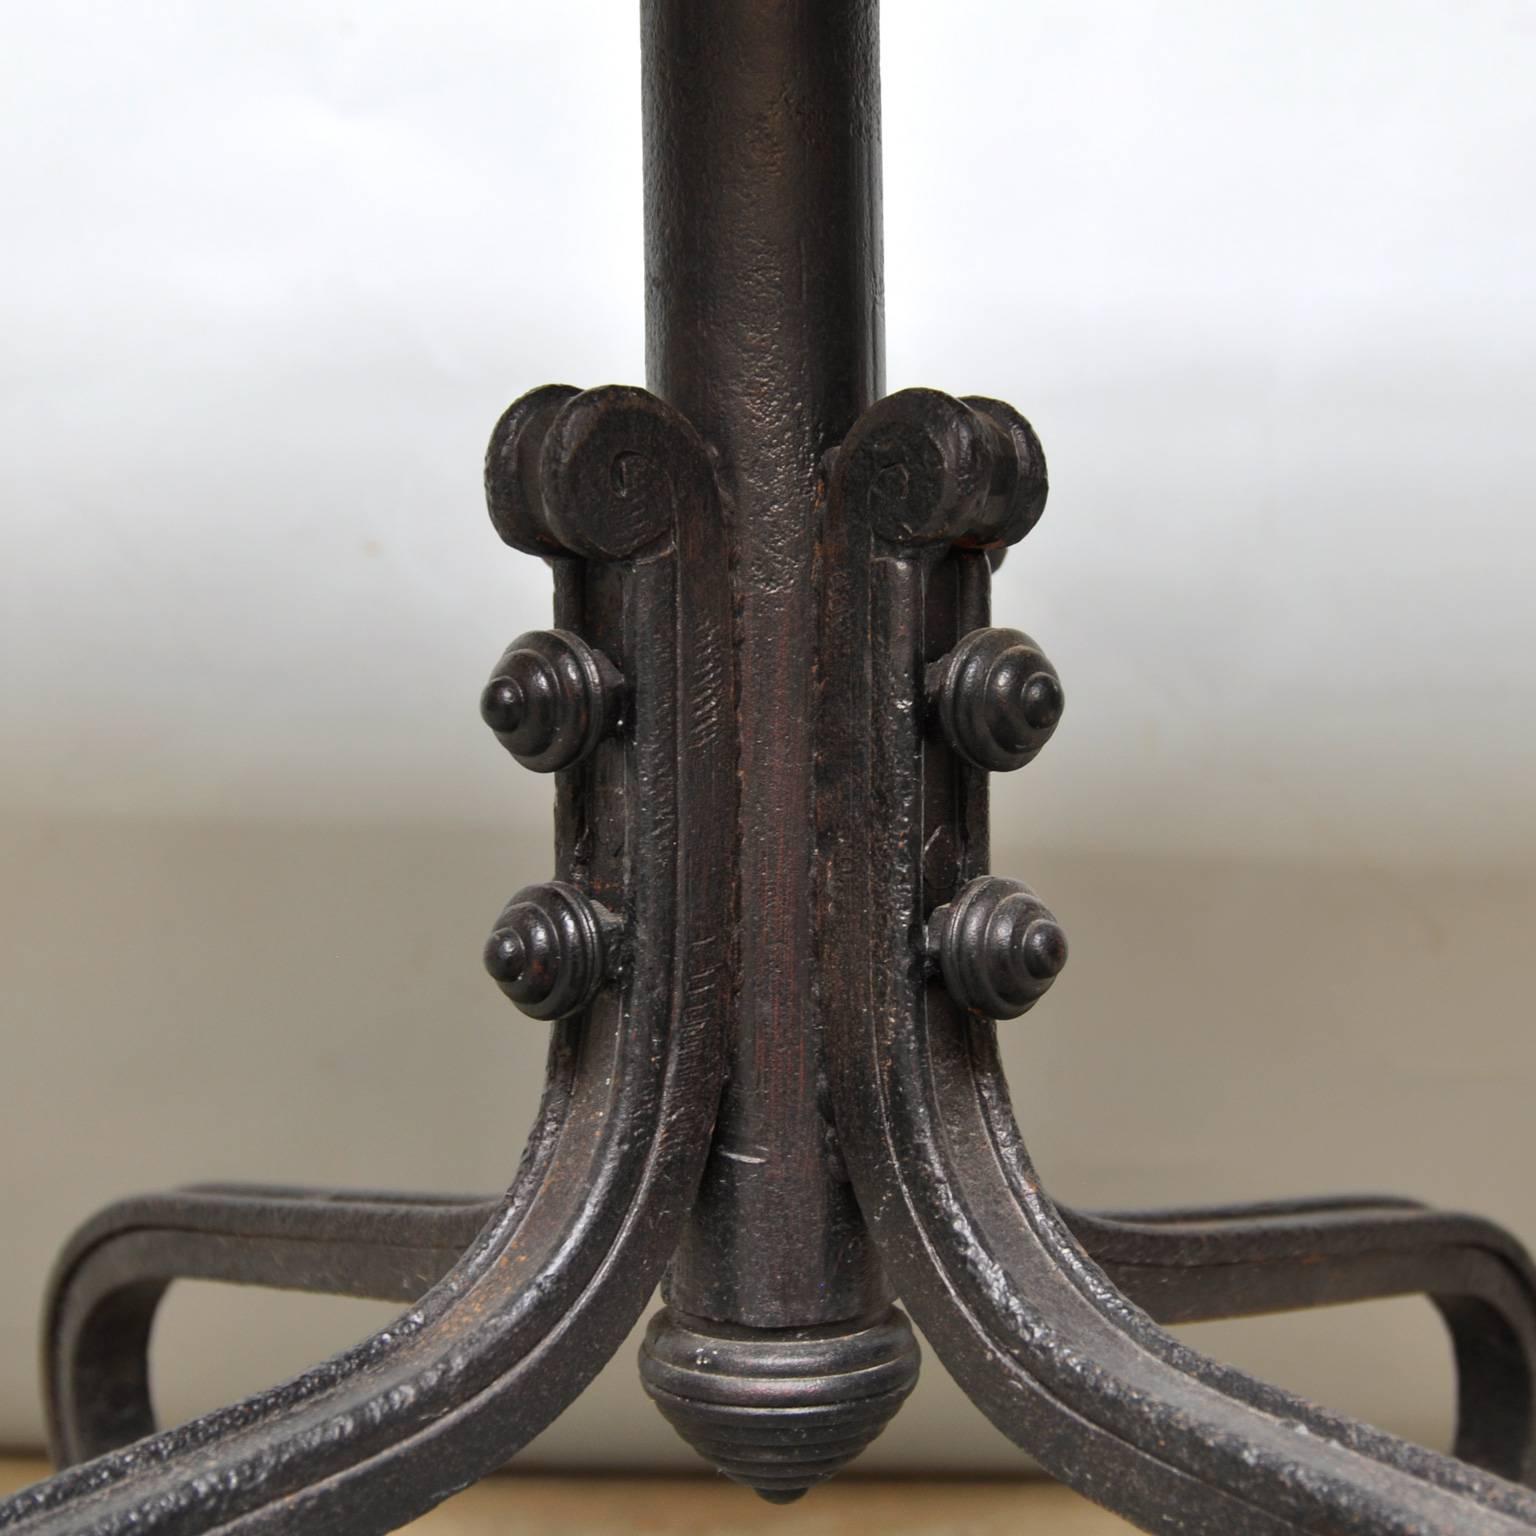 Hungarian Small Table on a Cast Iron Foot, circa 1925